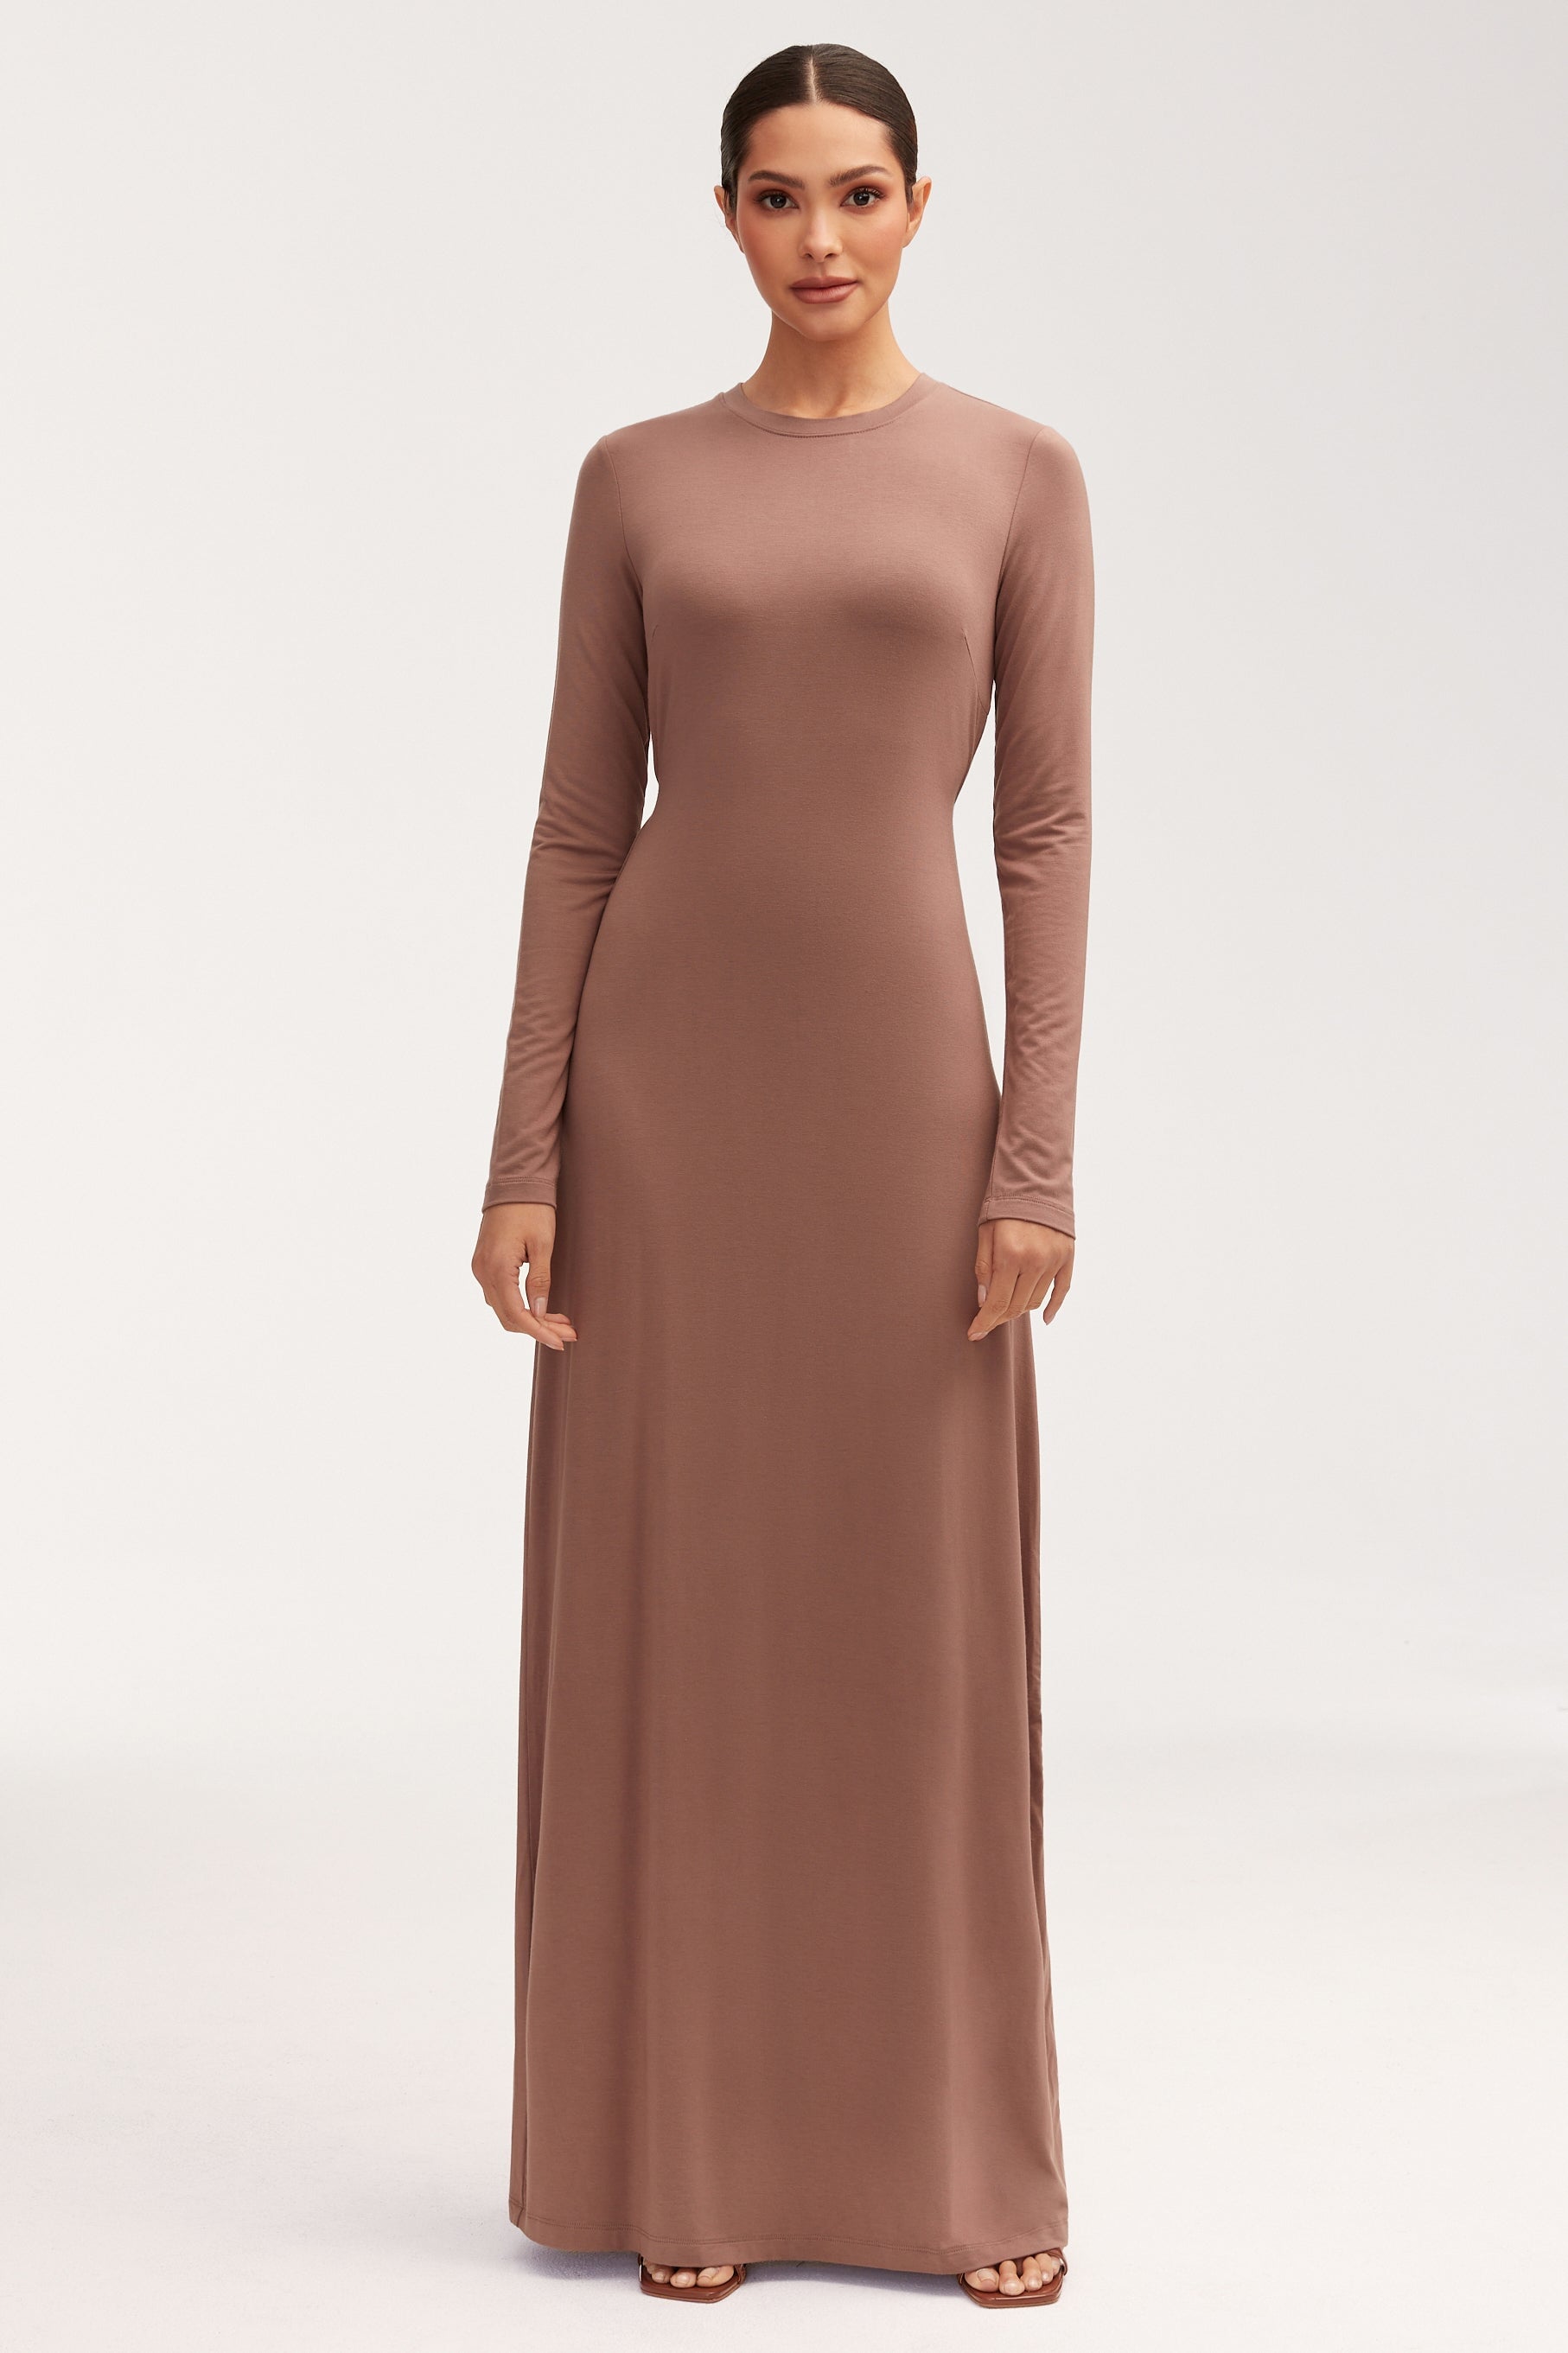 Essential Bamboo Jersey Maxi Dress - Deep Taupe Dresses epschoolboard 